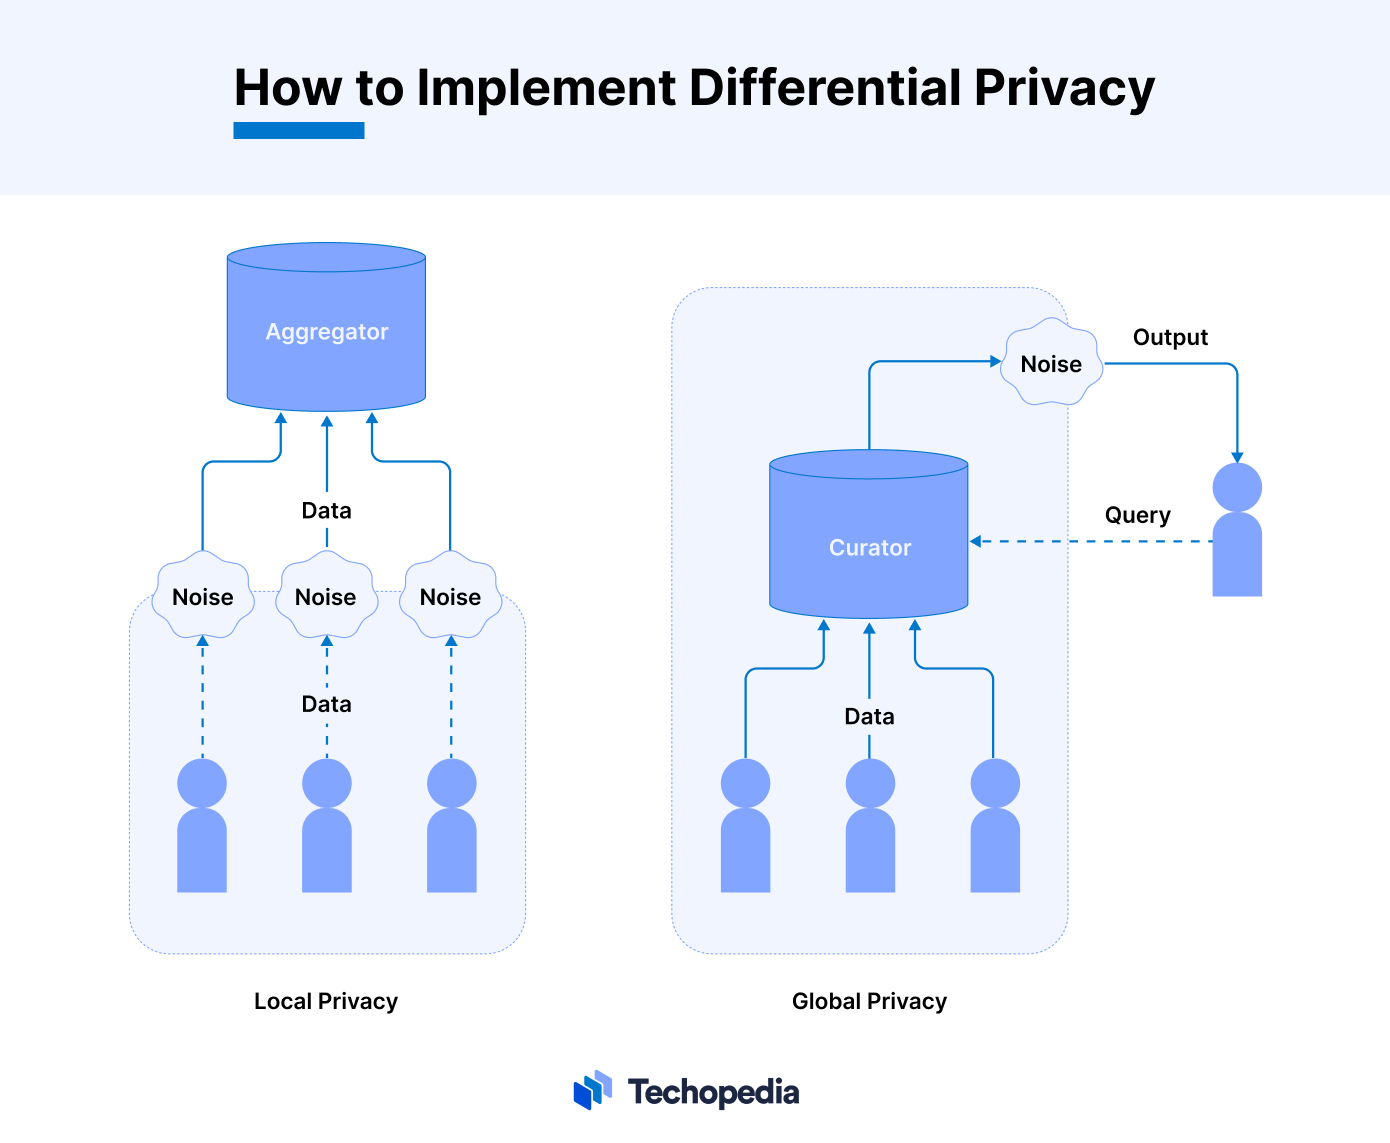 How to Implement Differential Privacy